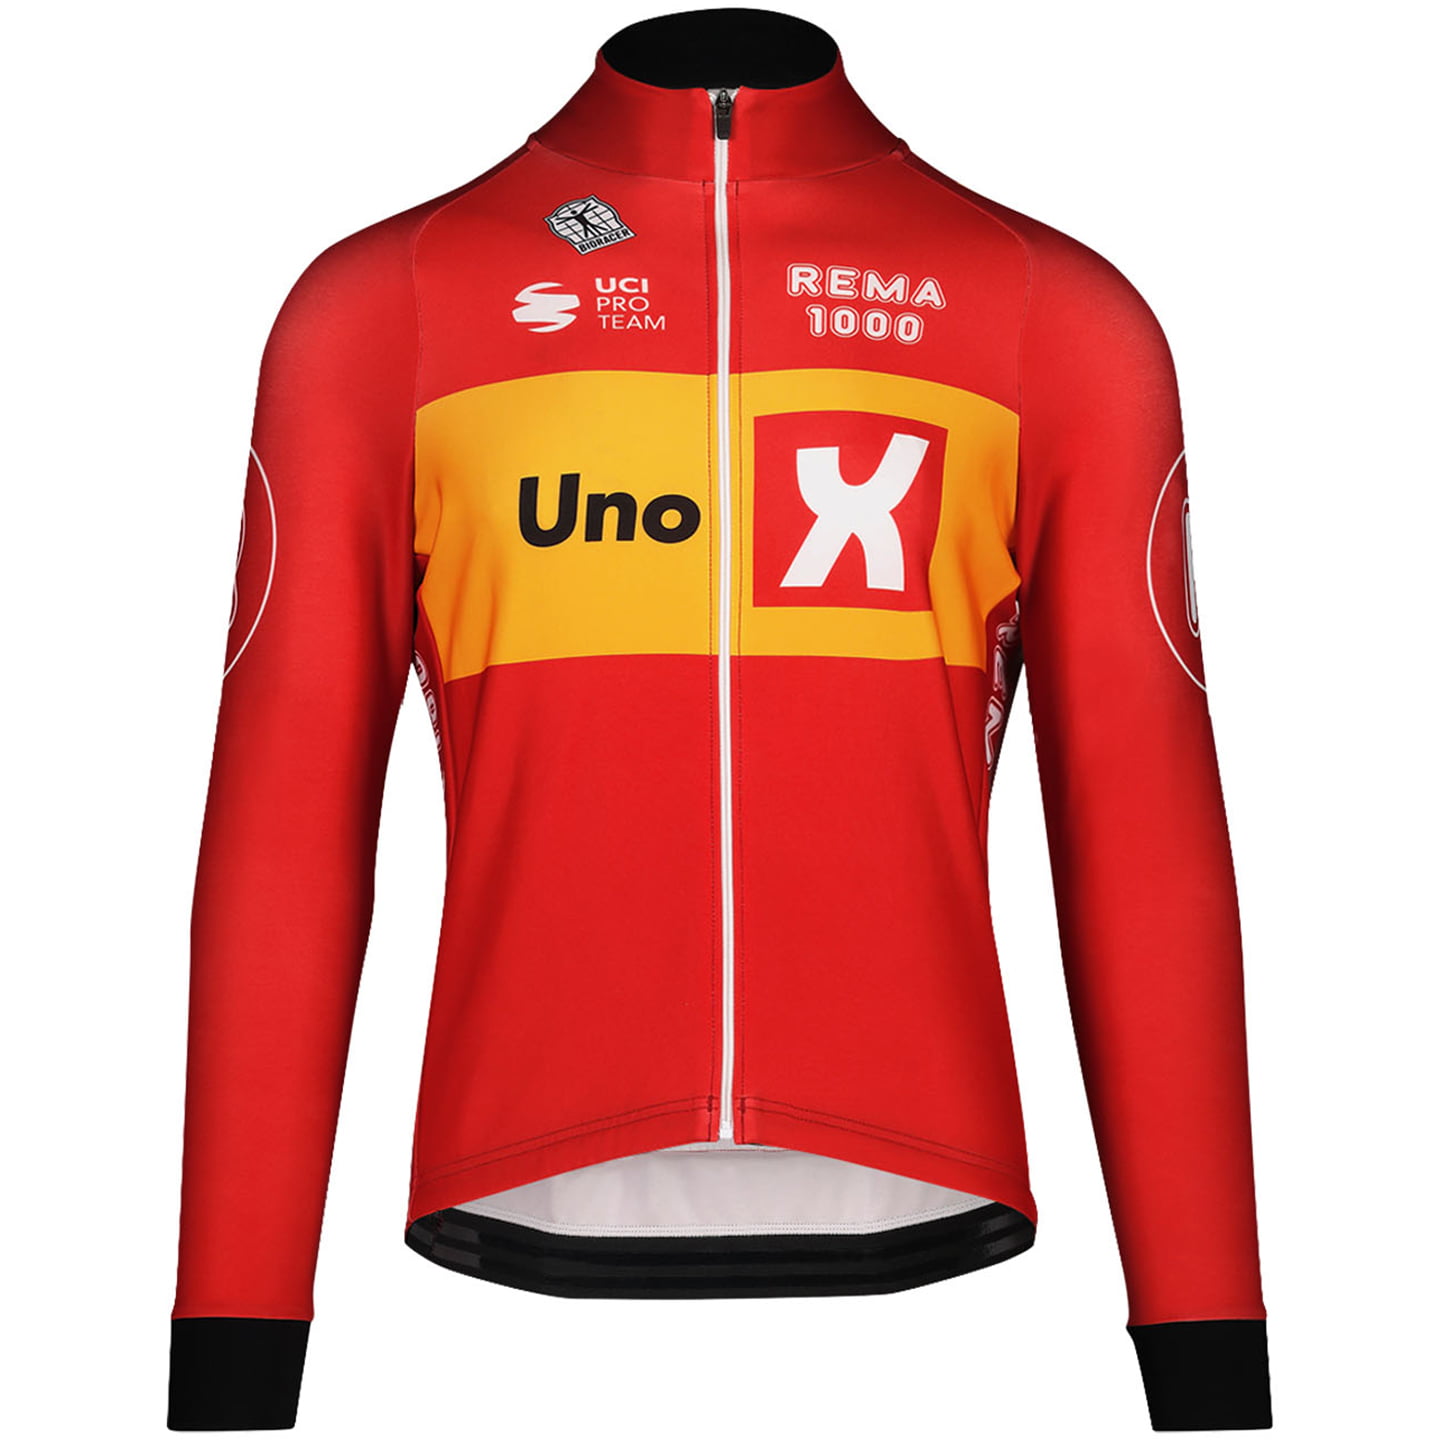 Uno-X Jersey Jacket Icon Tempest TdF 2023 Jersey / Jacket, for men, size 2XL, Cycle jacket, Cycling gear